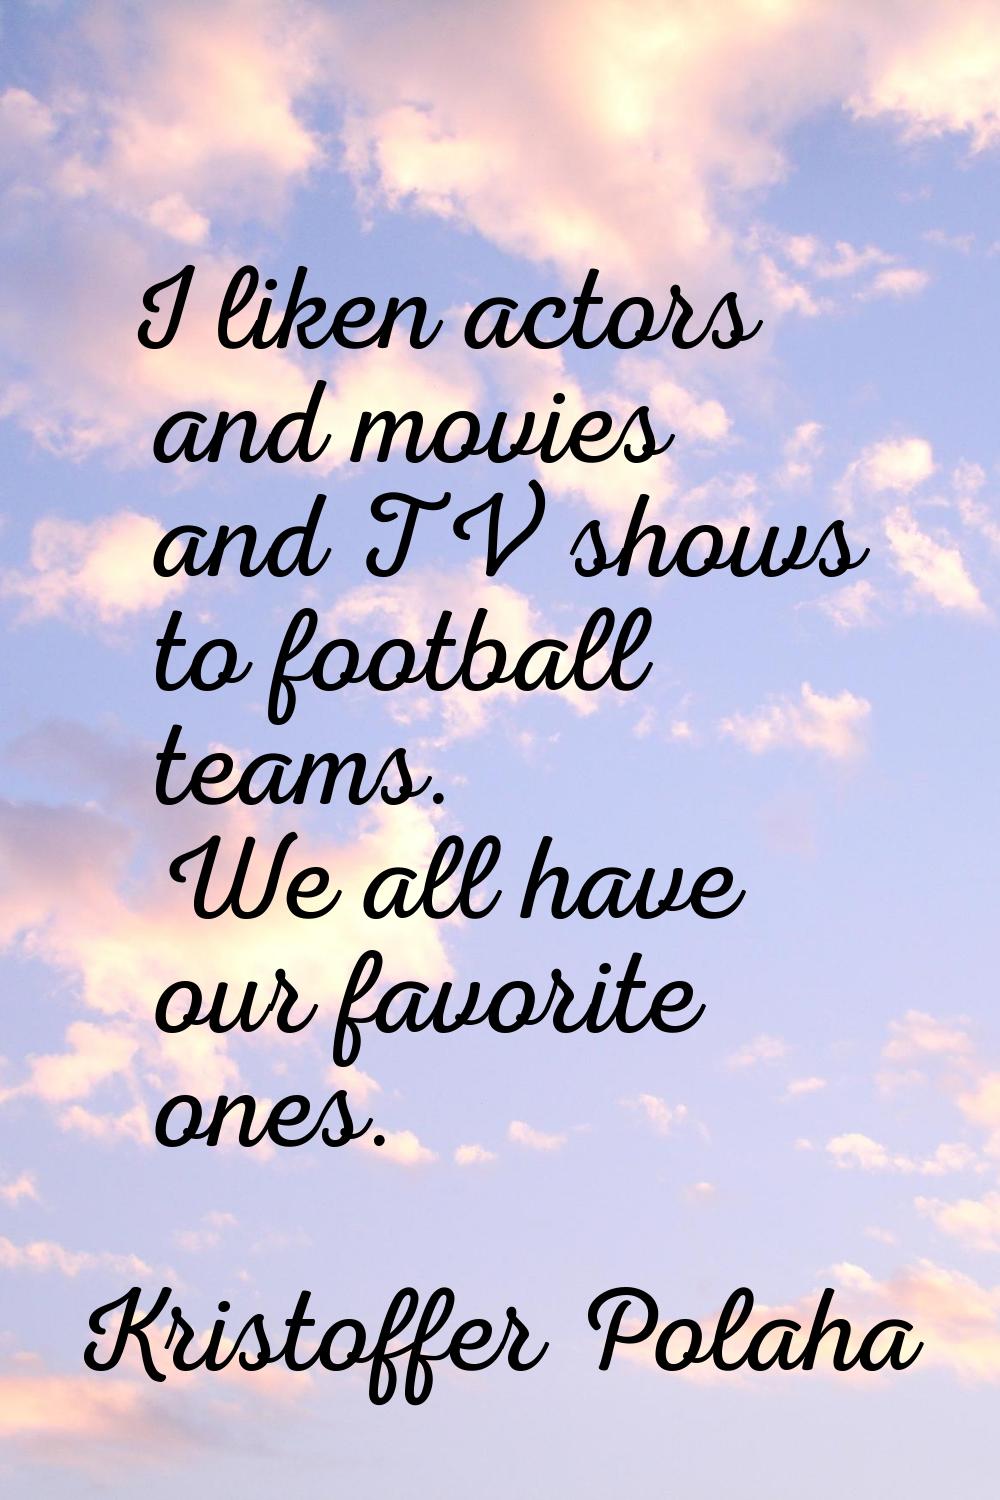 I liken actors and movies and TV shows to football teams. We all have our favorite ones.